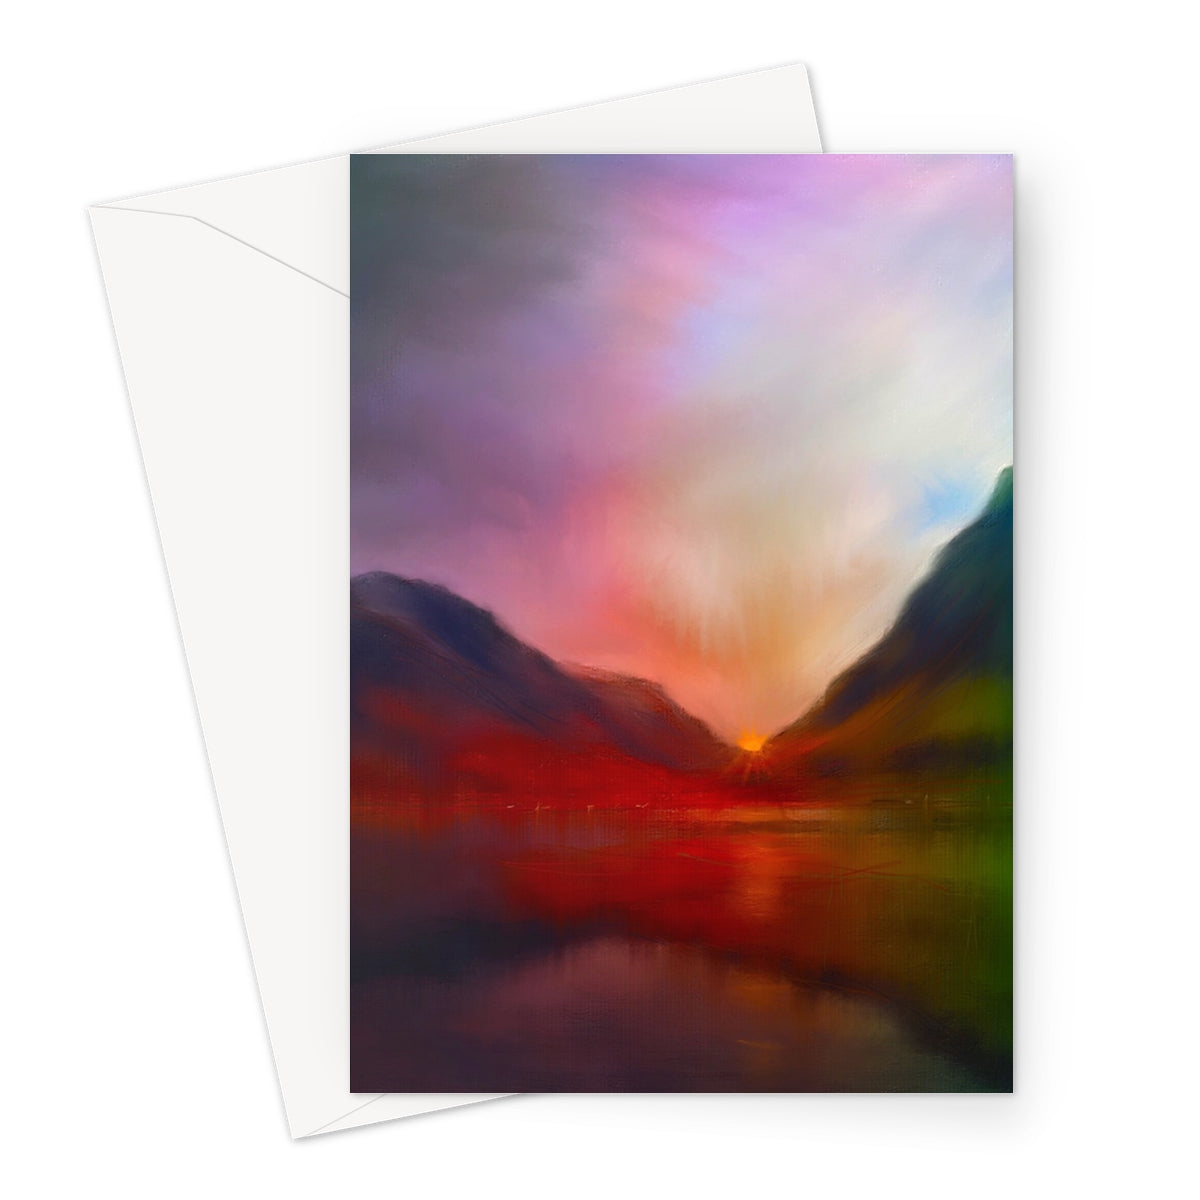 Glencoe Sunset Art Gifts Greeting Card-Greetings Cards-Glencoe Art Gallery-A5 Portrait-10 Cards-Paintings, Prints, Homeware, Art Gifts From Scotland By Scottish Artist Kevin Hunter